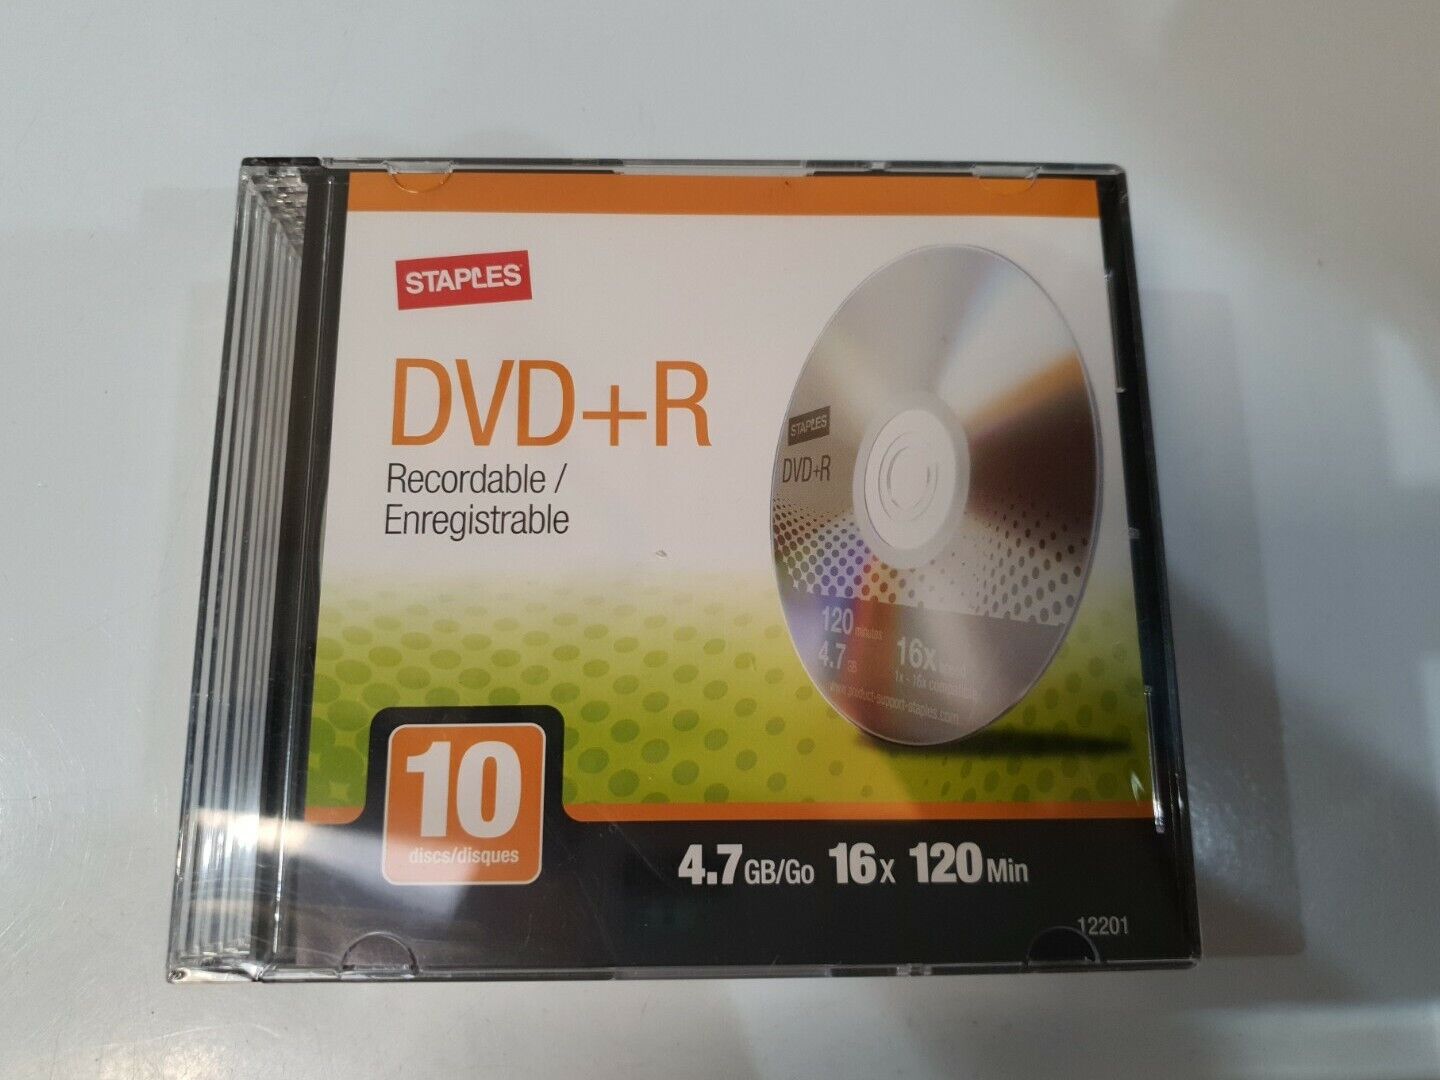 Staples DVD+R Recordable / Enregistrable - 10-Pack 4.7GB   16 x 120 Min - NEW